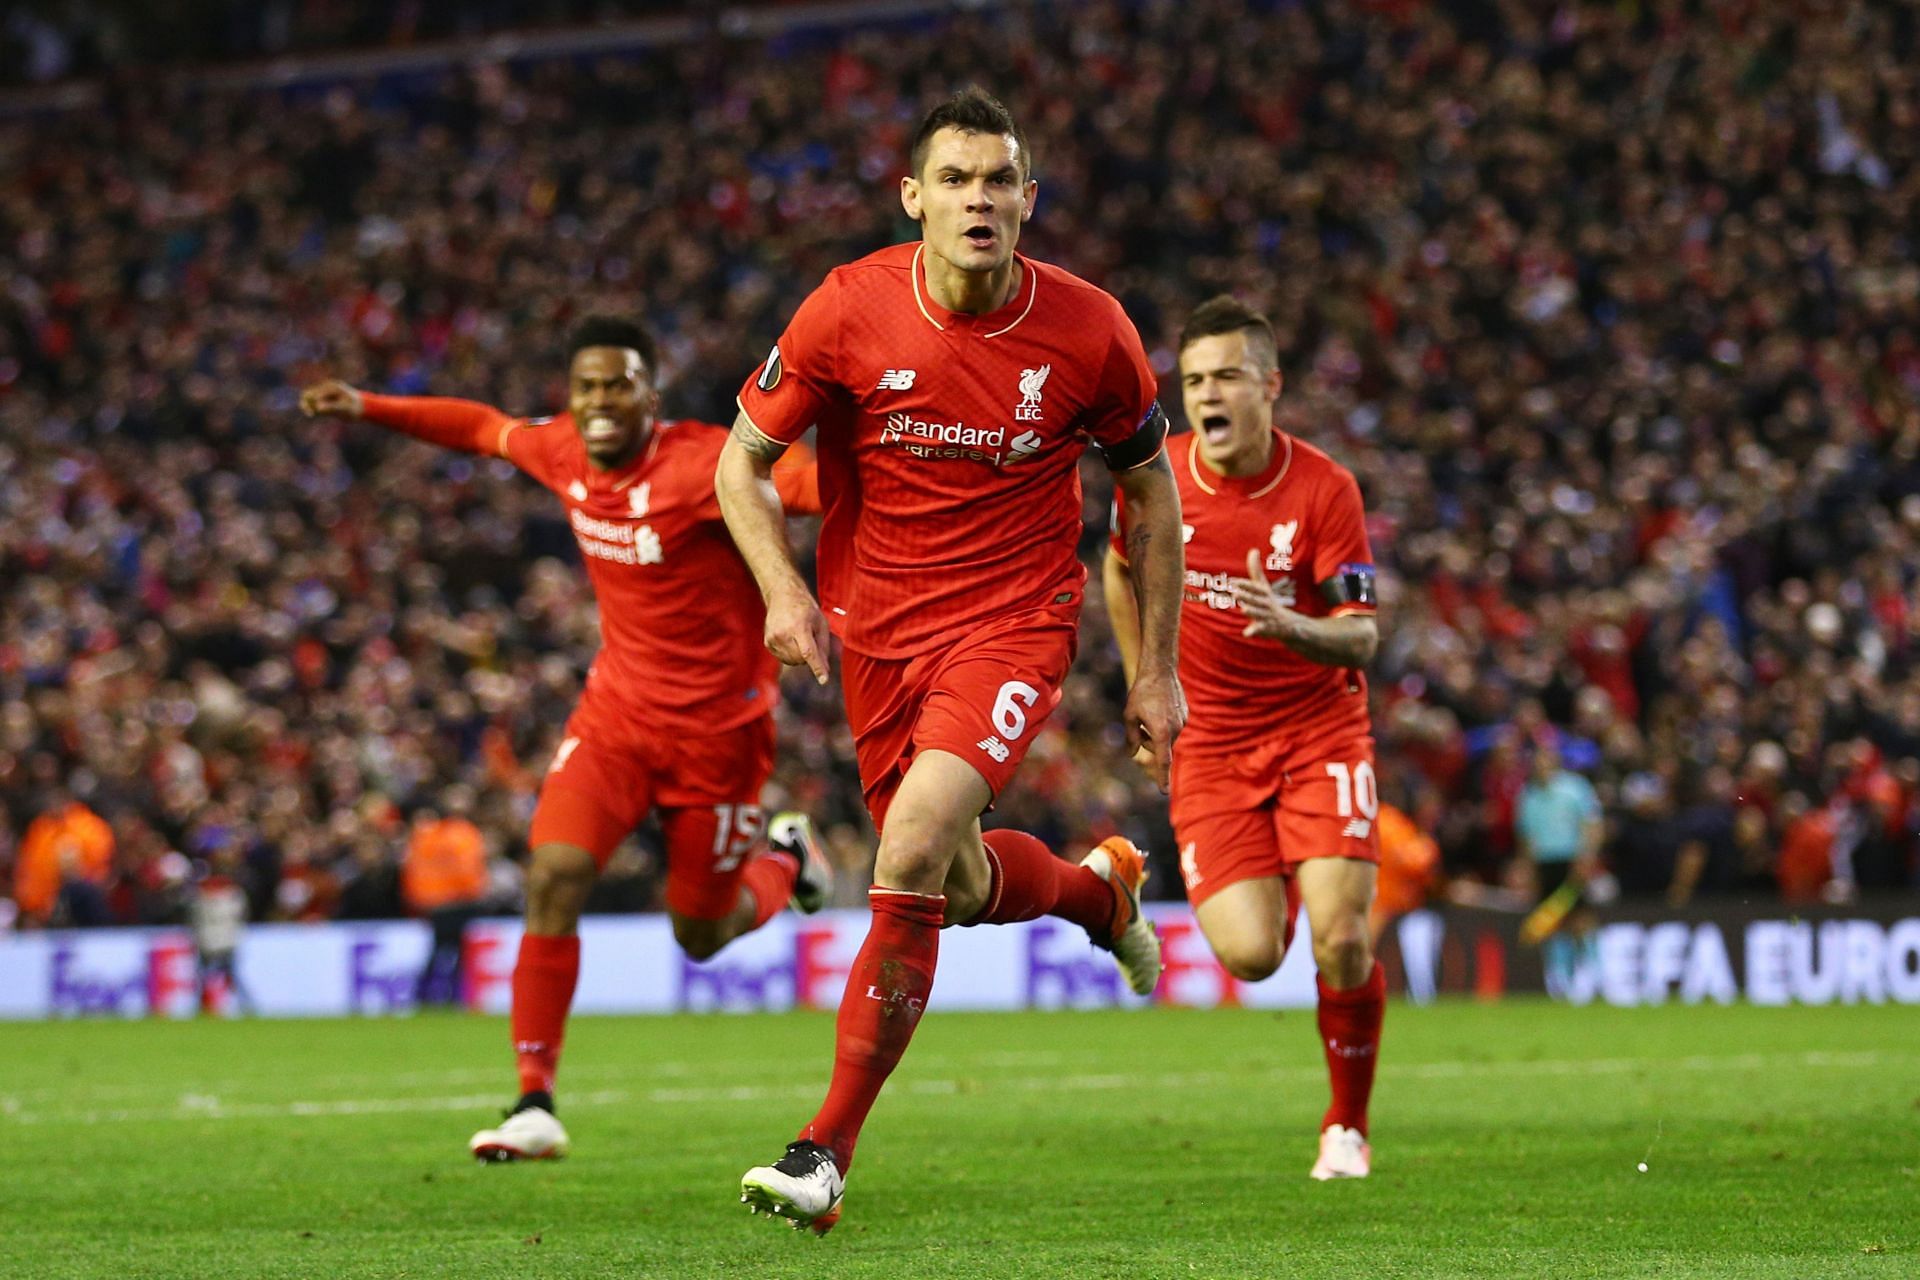 Dejan Lovren with an iconic goal to win the game